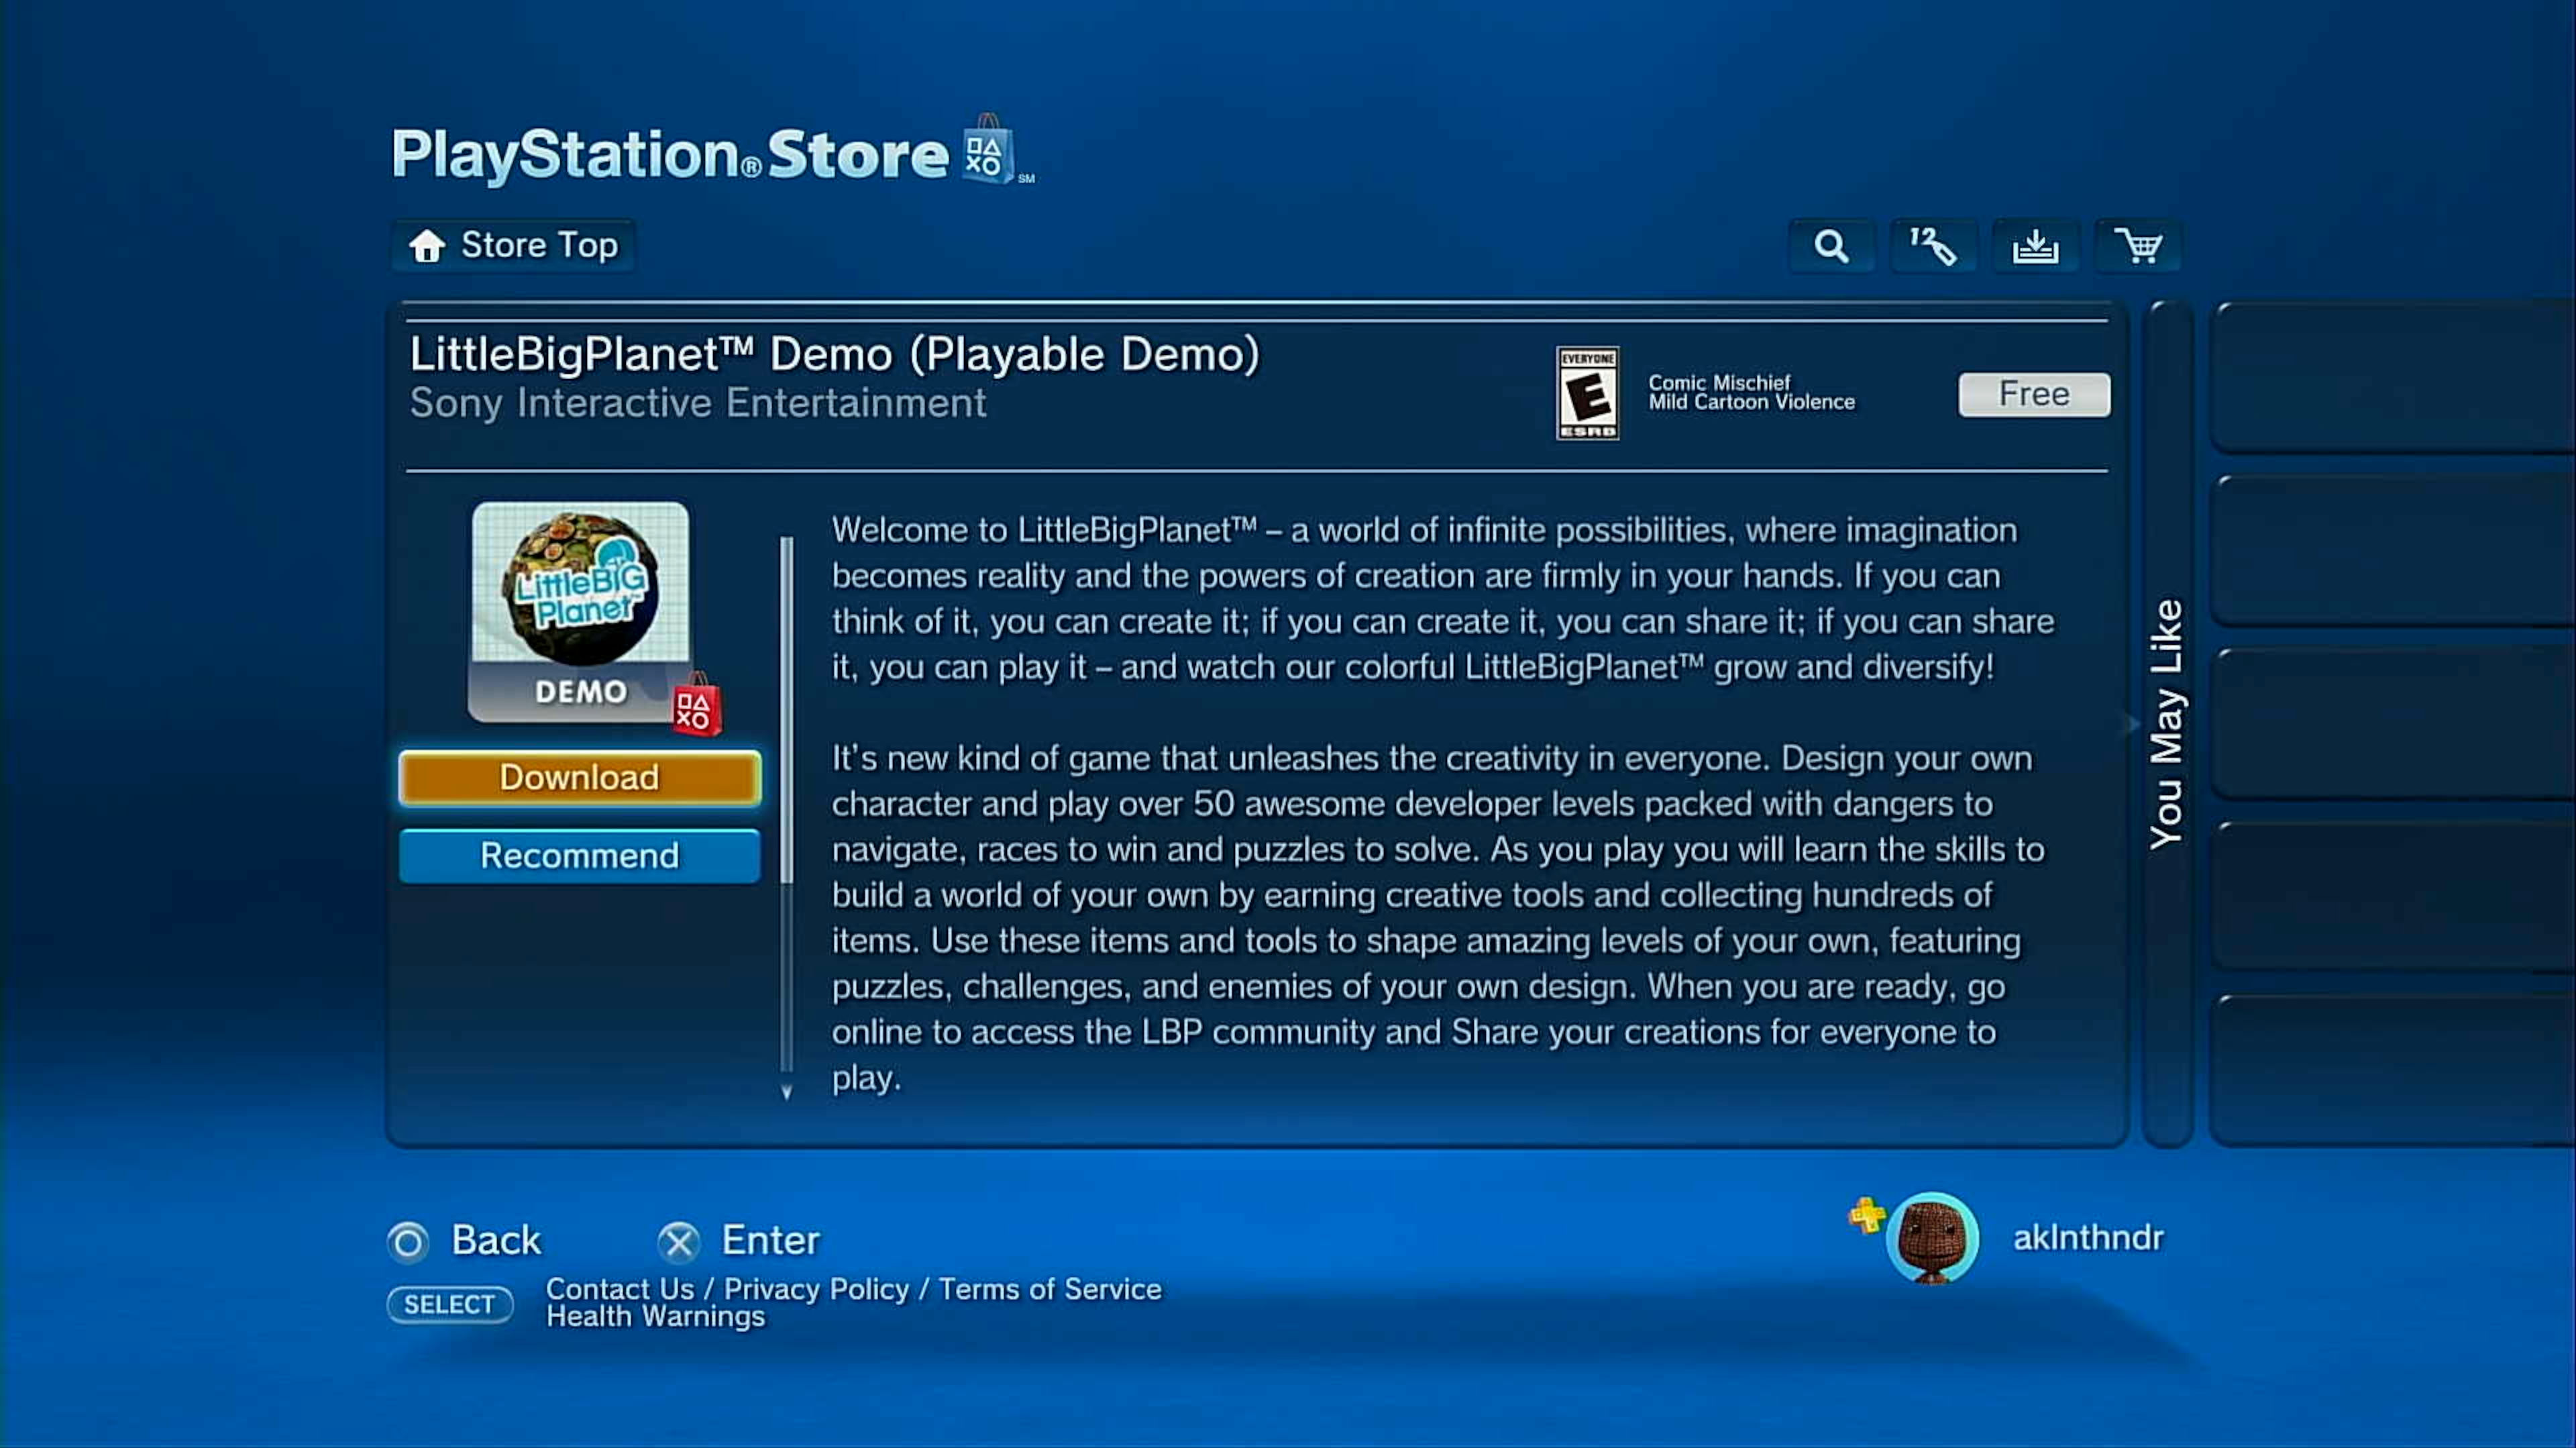 LittleBigPlanet Demo (Playable Demo) on the PlayStation Store